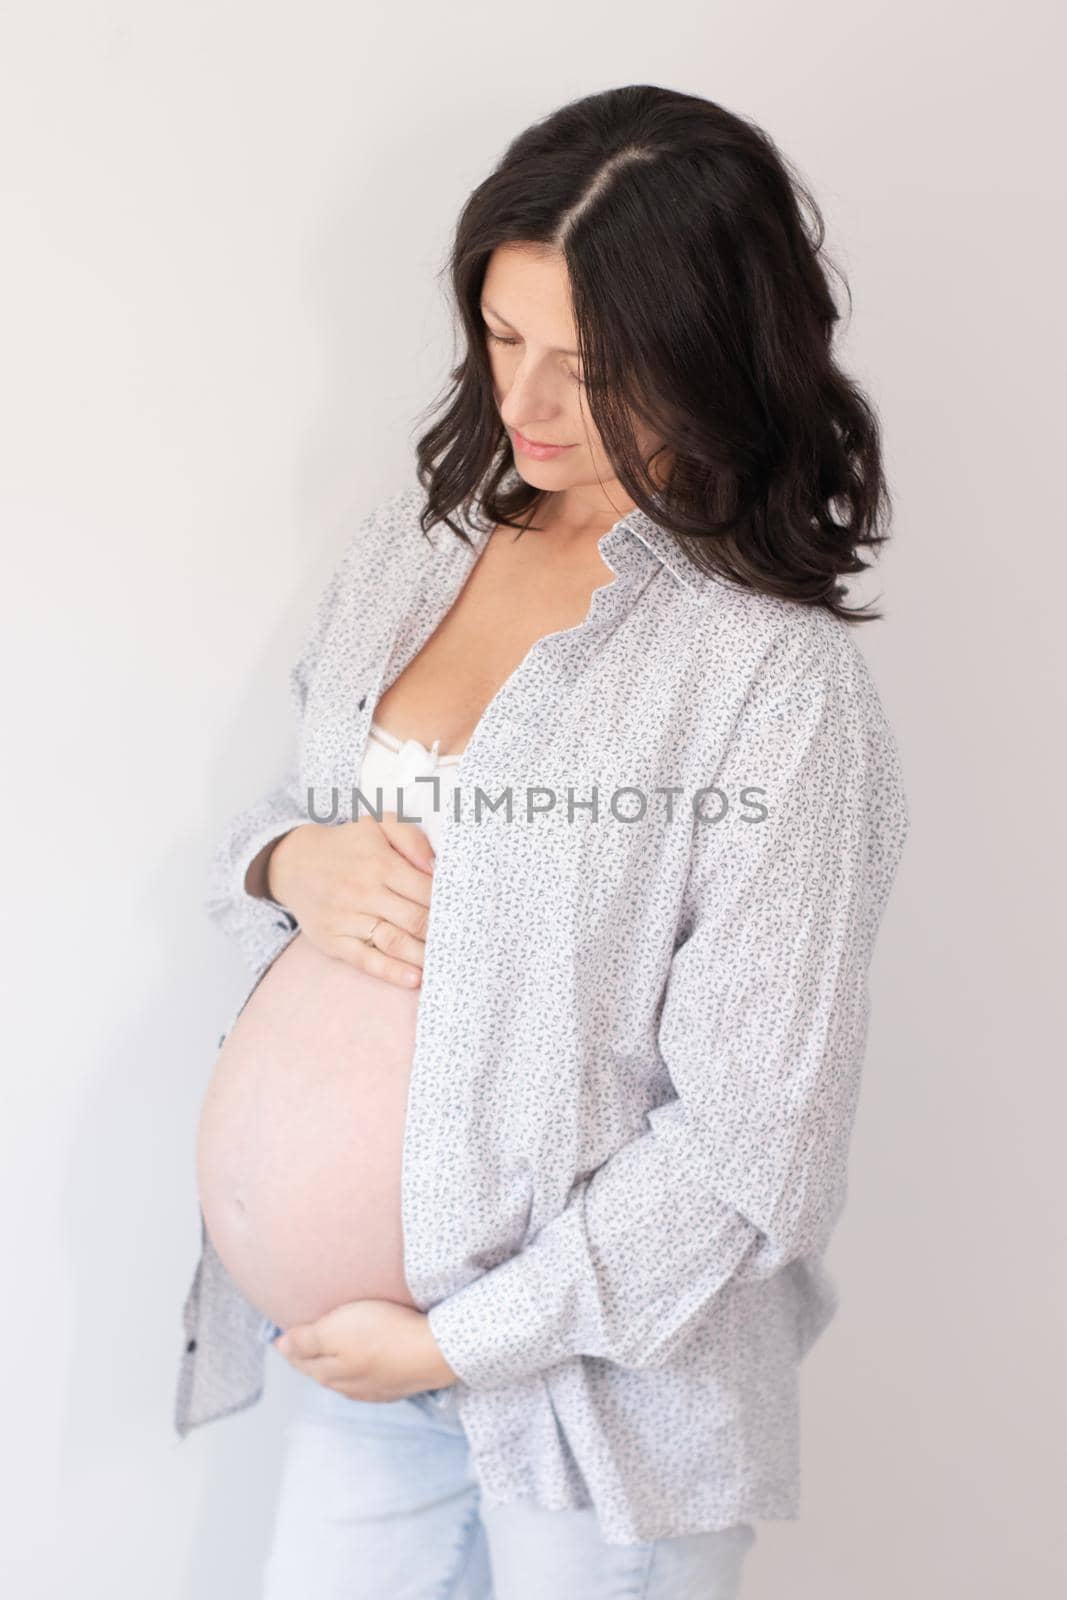 Happy expectant mother, feeling kicks, caressing big belly, smiling. Pregnant woman touching tummy, speaking to unborn baby. Motherhood, pregnancy concept.